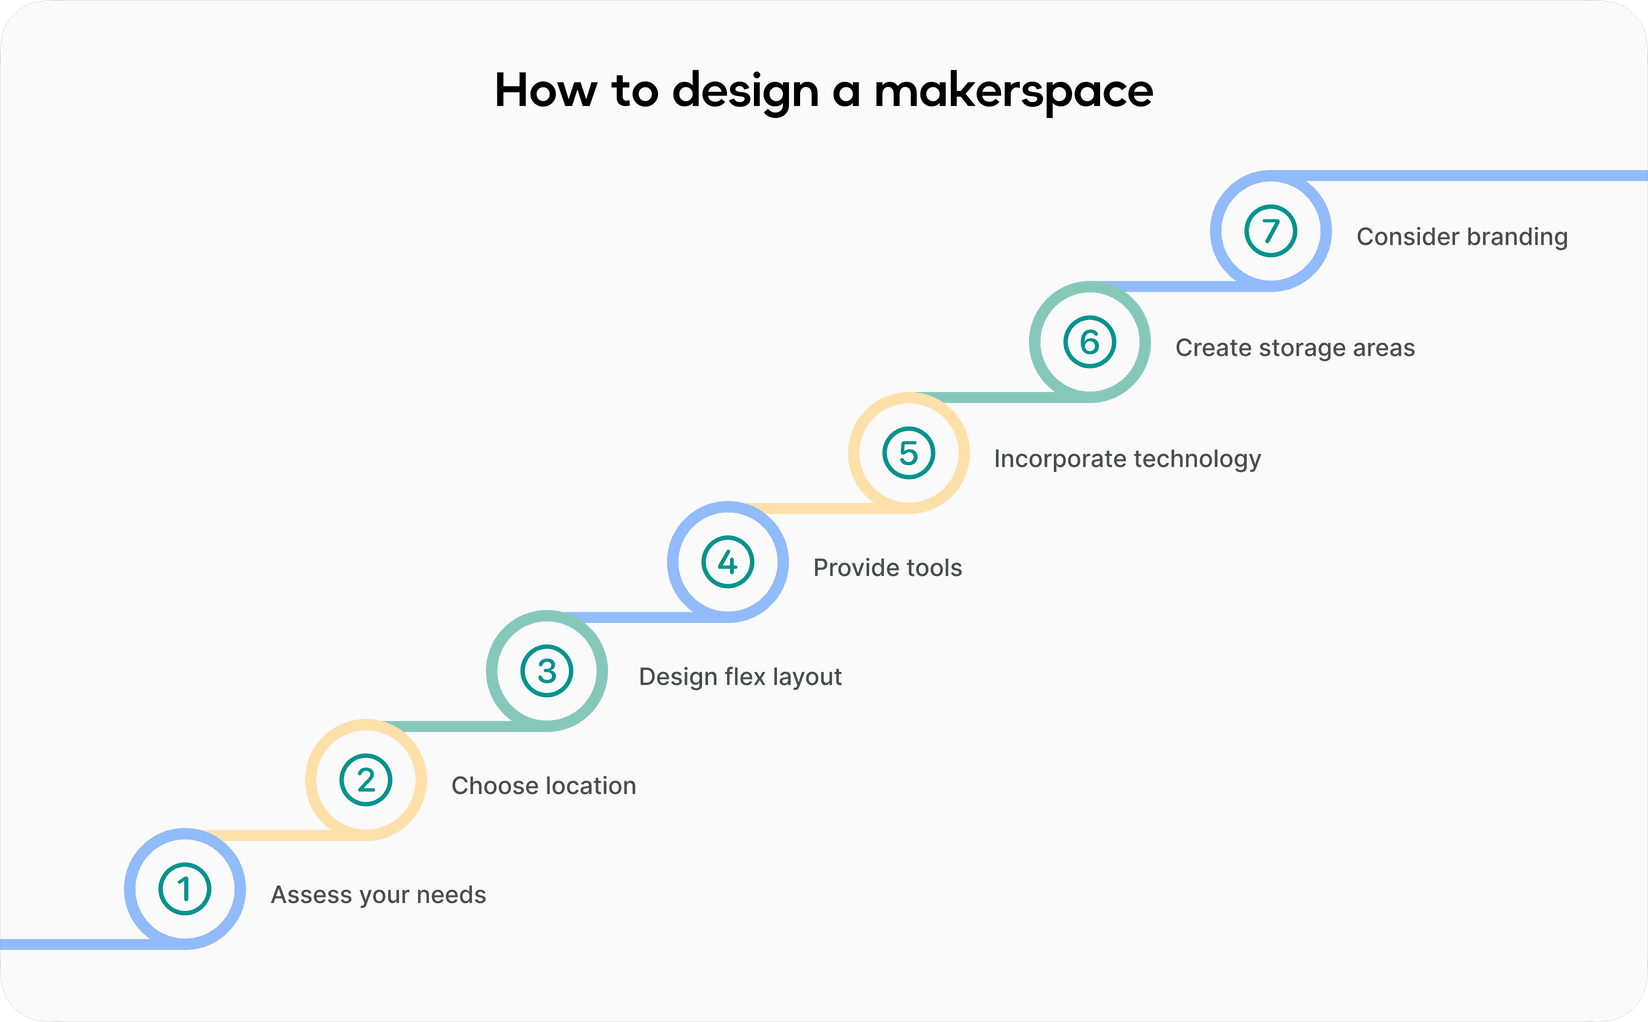 Makerspace design infographic